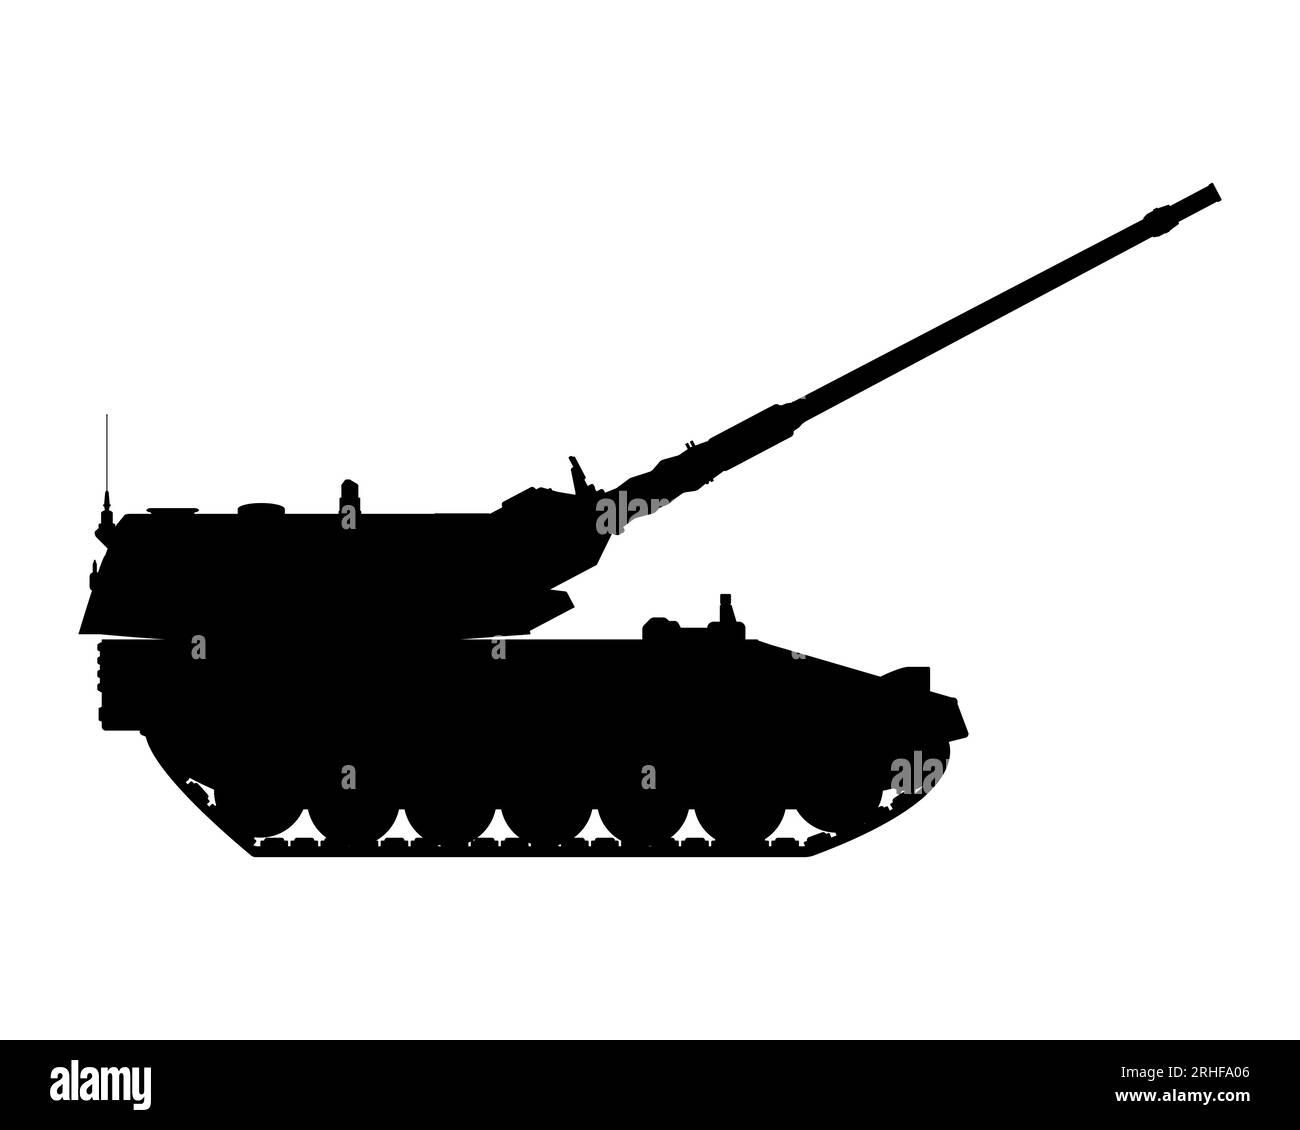 Self-propelled howitzer silhouette. Raised barrel. Military armored ...